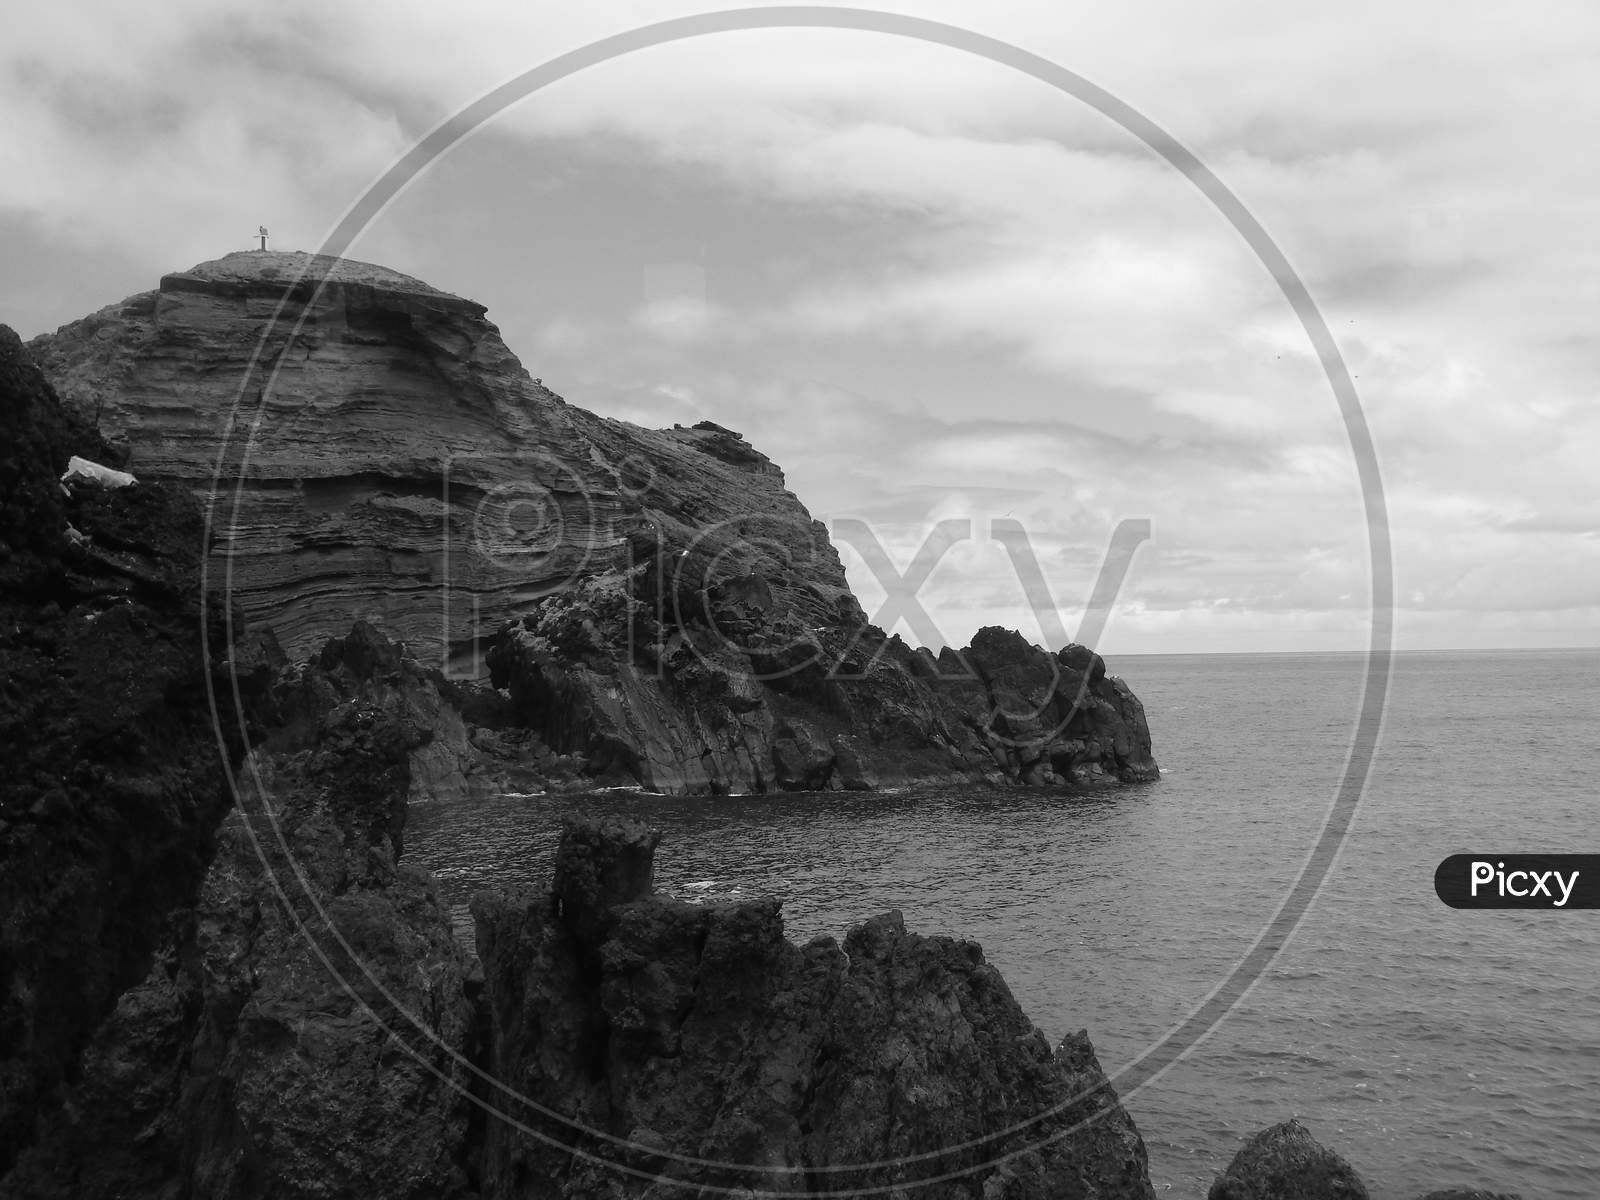 Black And White Views Of The Rocky North Coast Of The Island Of Madeira In The Atlantic Ocean